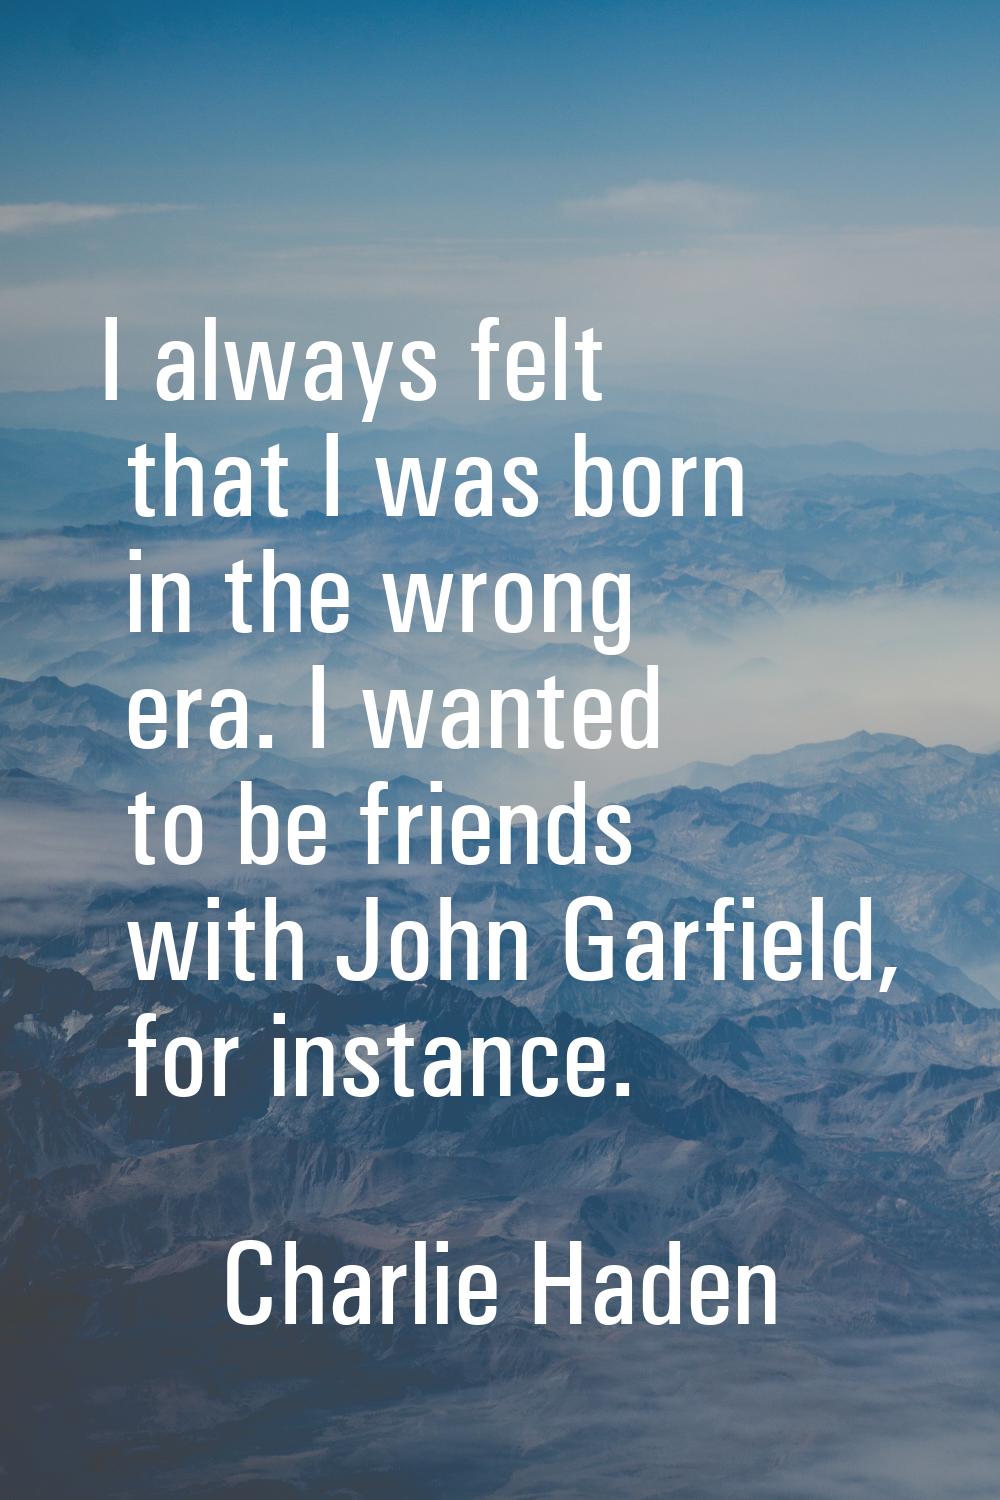 I always felt that I was born in the wrong era. I wanted to be friends with John Garfield, for inst